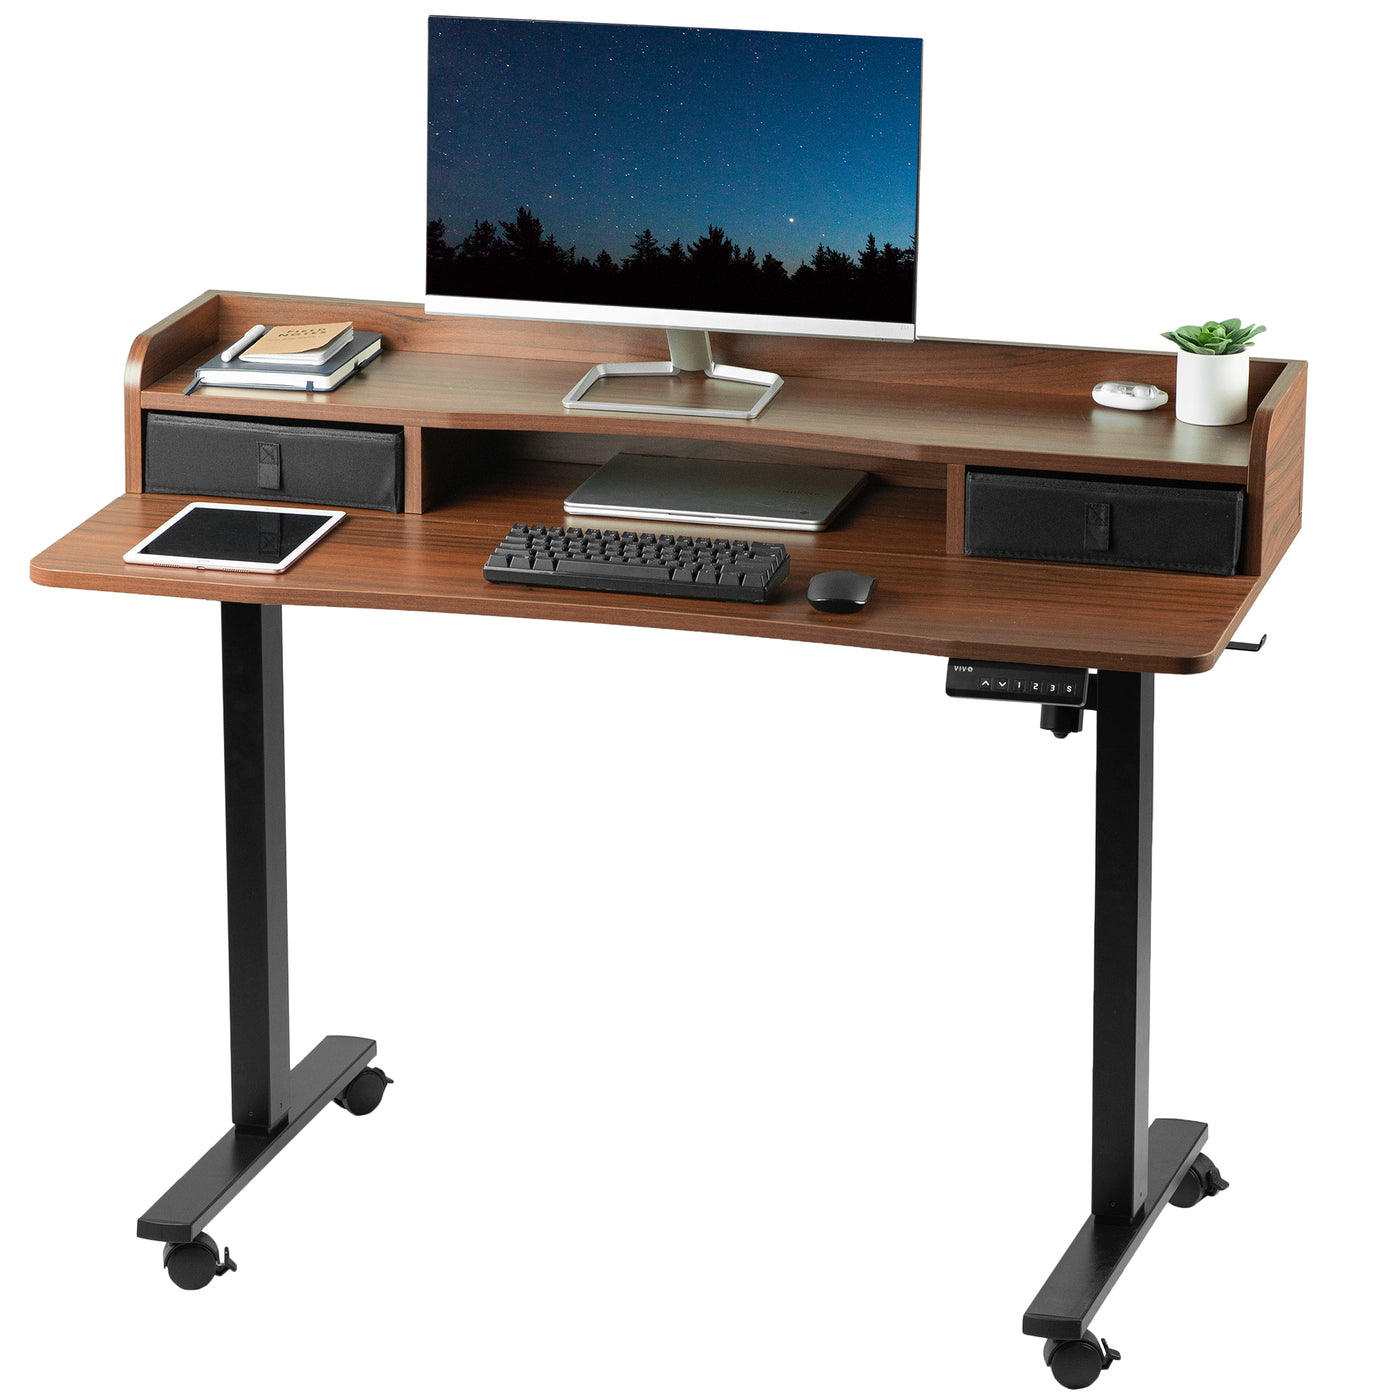 Ergonomic dual-tier height adjustable electric desk with built-in storage and drawers.